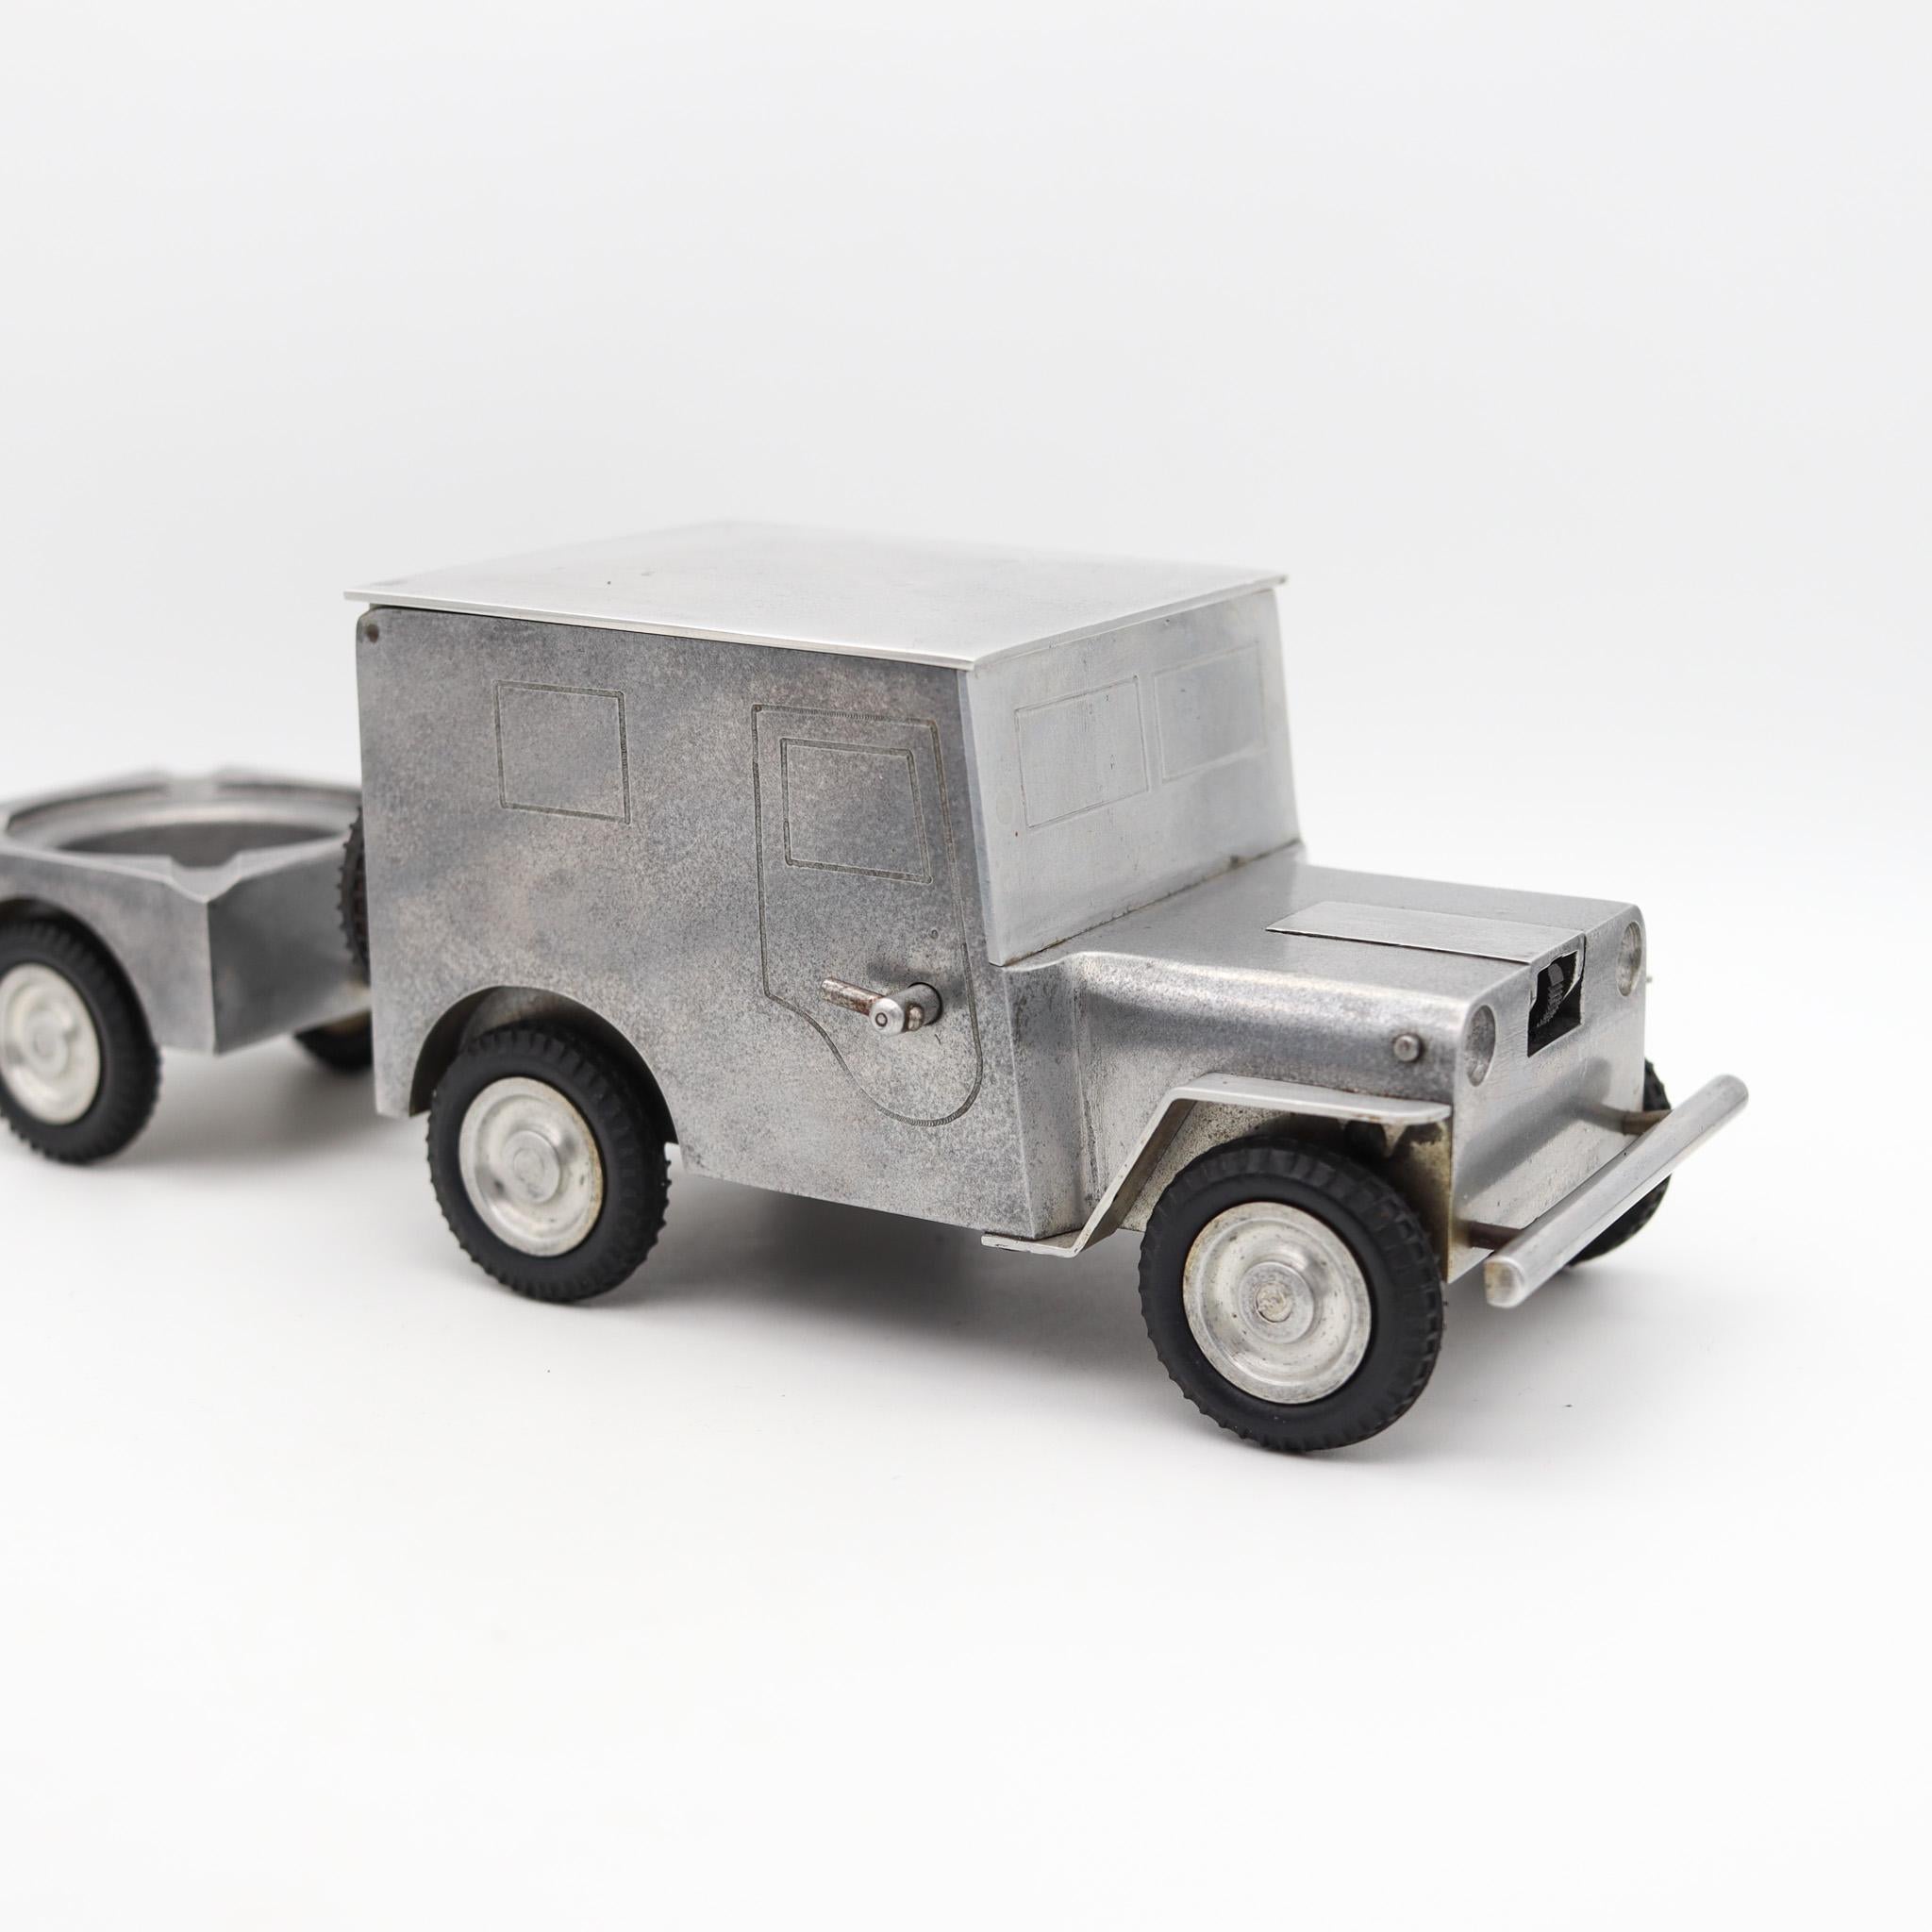 Army Truck Lighter, Cigarette case & ashtray by Walter Baier Company.

Beautiful large sized aluminum lighter by the Baier Company, in the shape of a jeep with a trailer . These wonderful and novel pieces were made very soon after the end of the